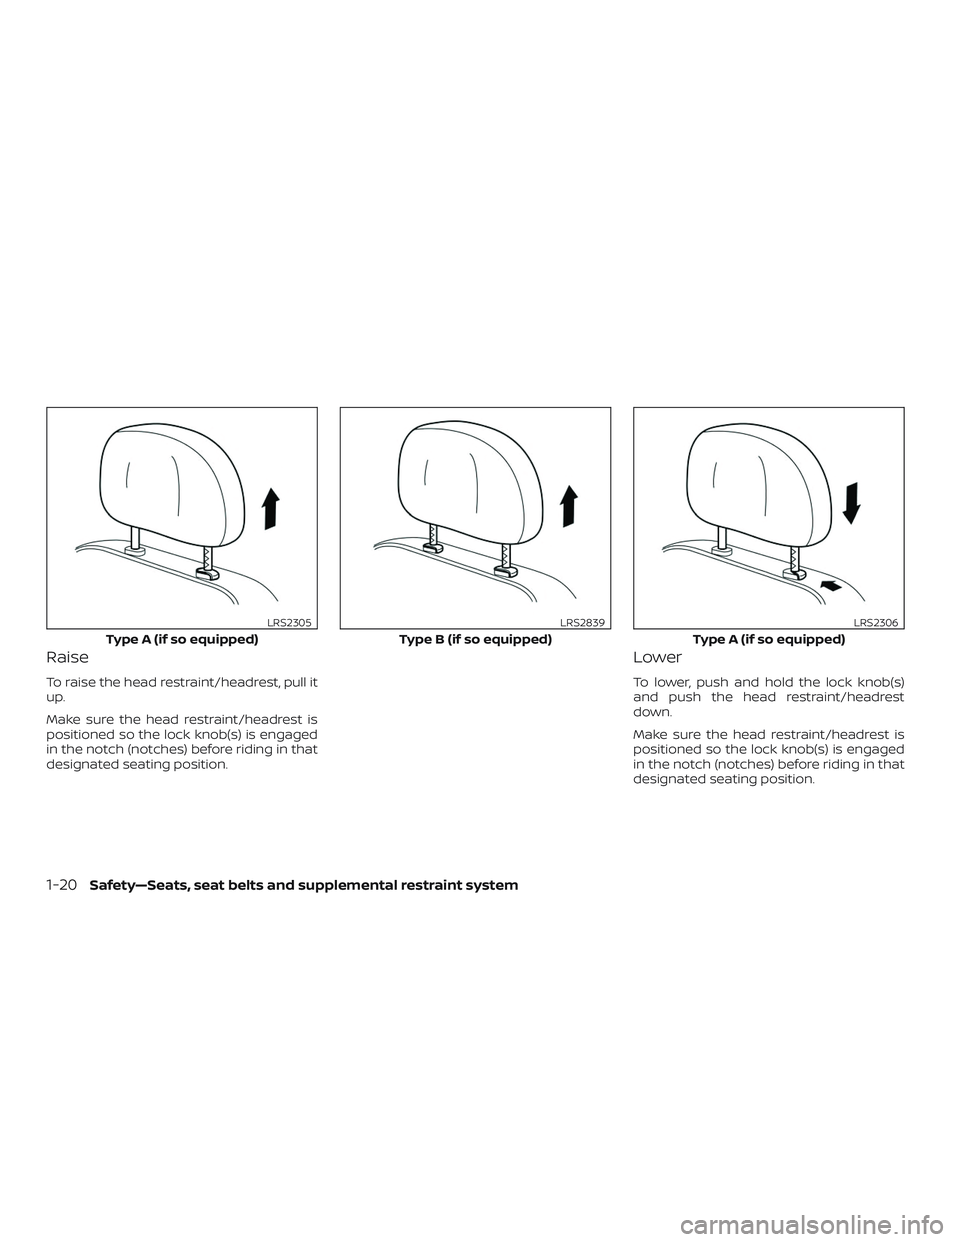 NISSAN NV PASSENGER VAN 2018 Service Manual Raise
To raise the head restraint/headrest, pull it
up.
Make sure the head restraint/headrest is
positioned so the lock knob(s) is engaged
in the notch (notches) before riding in that
designated seati